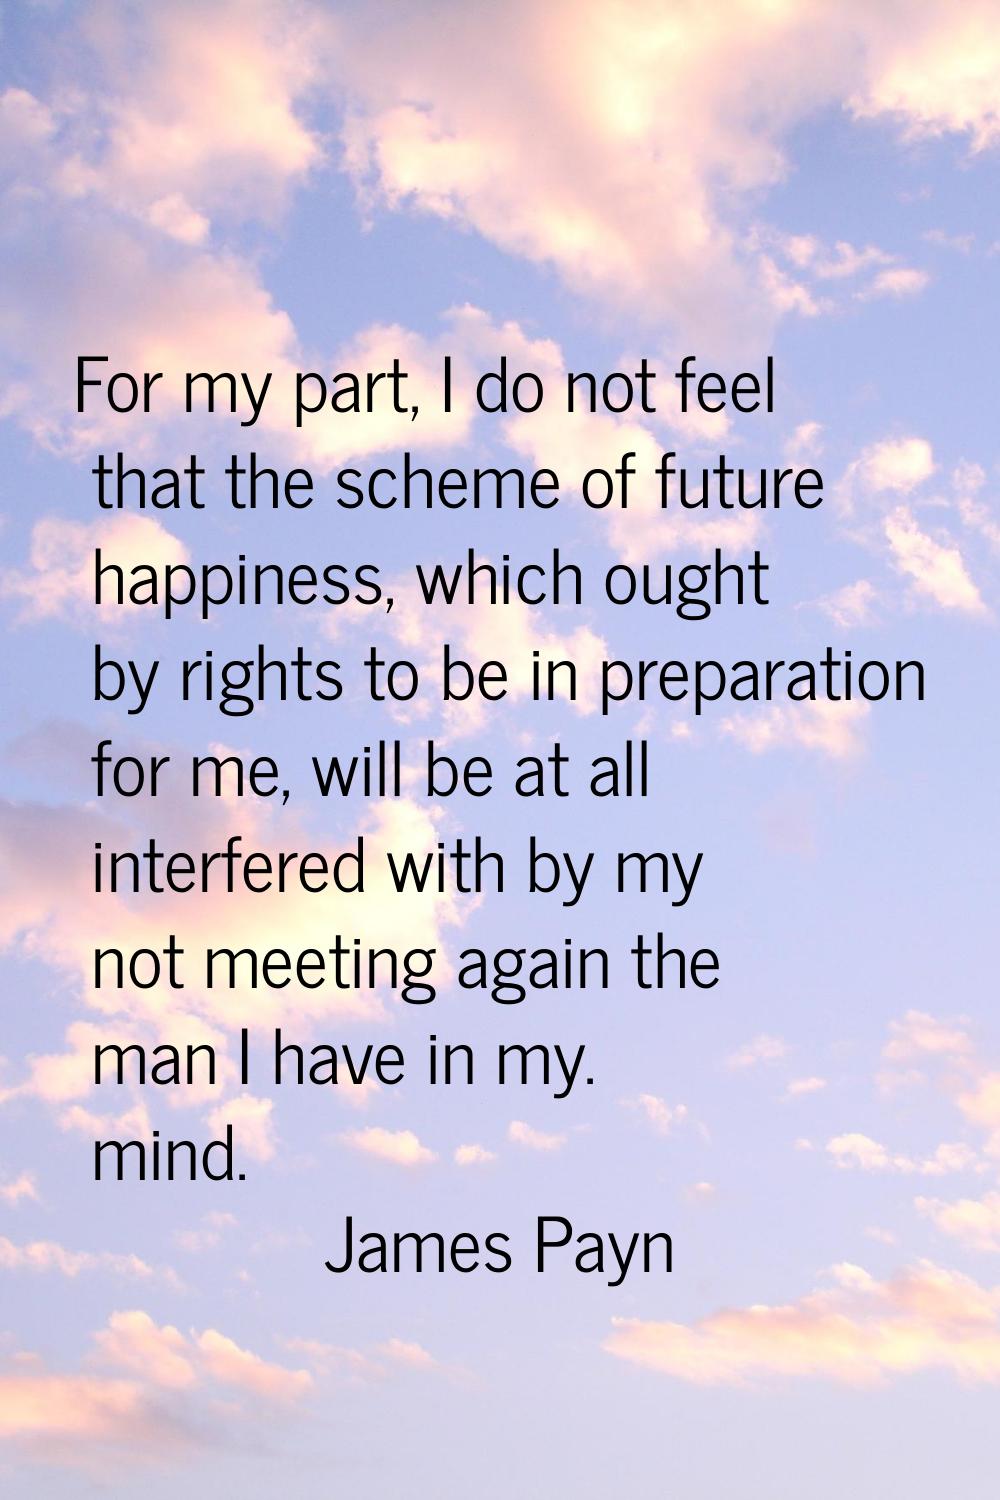 For my part, I do not feel that the scheme of future happiness, which ought by rights to be in prep